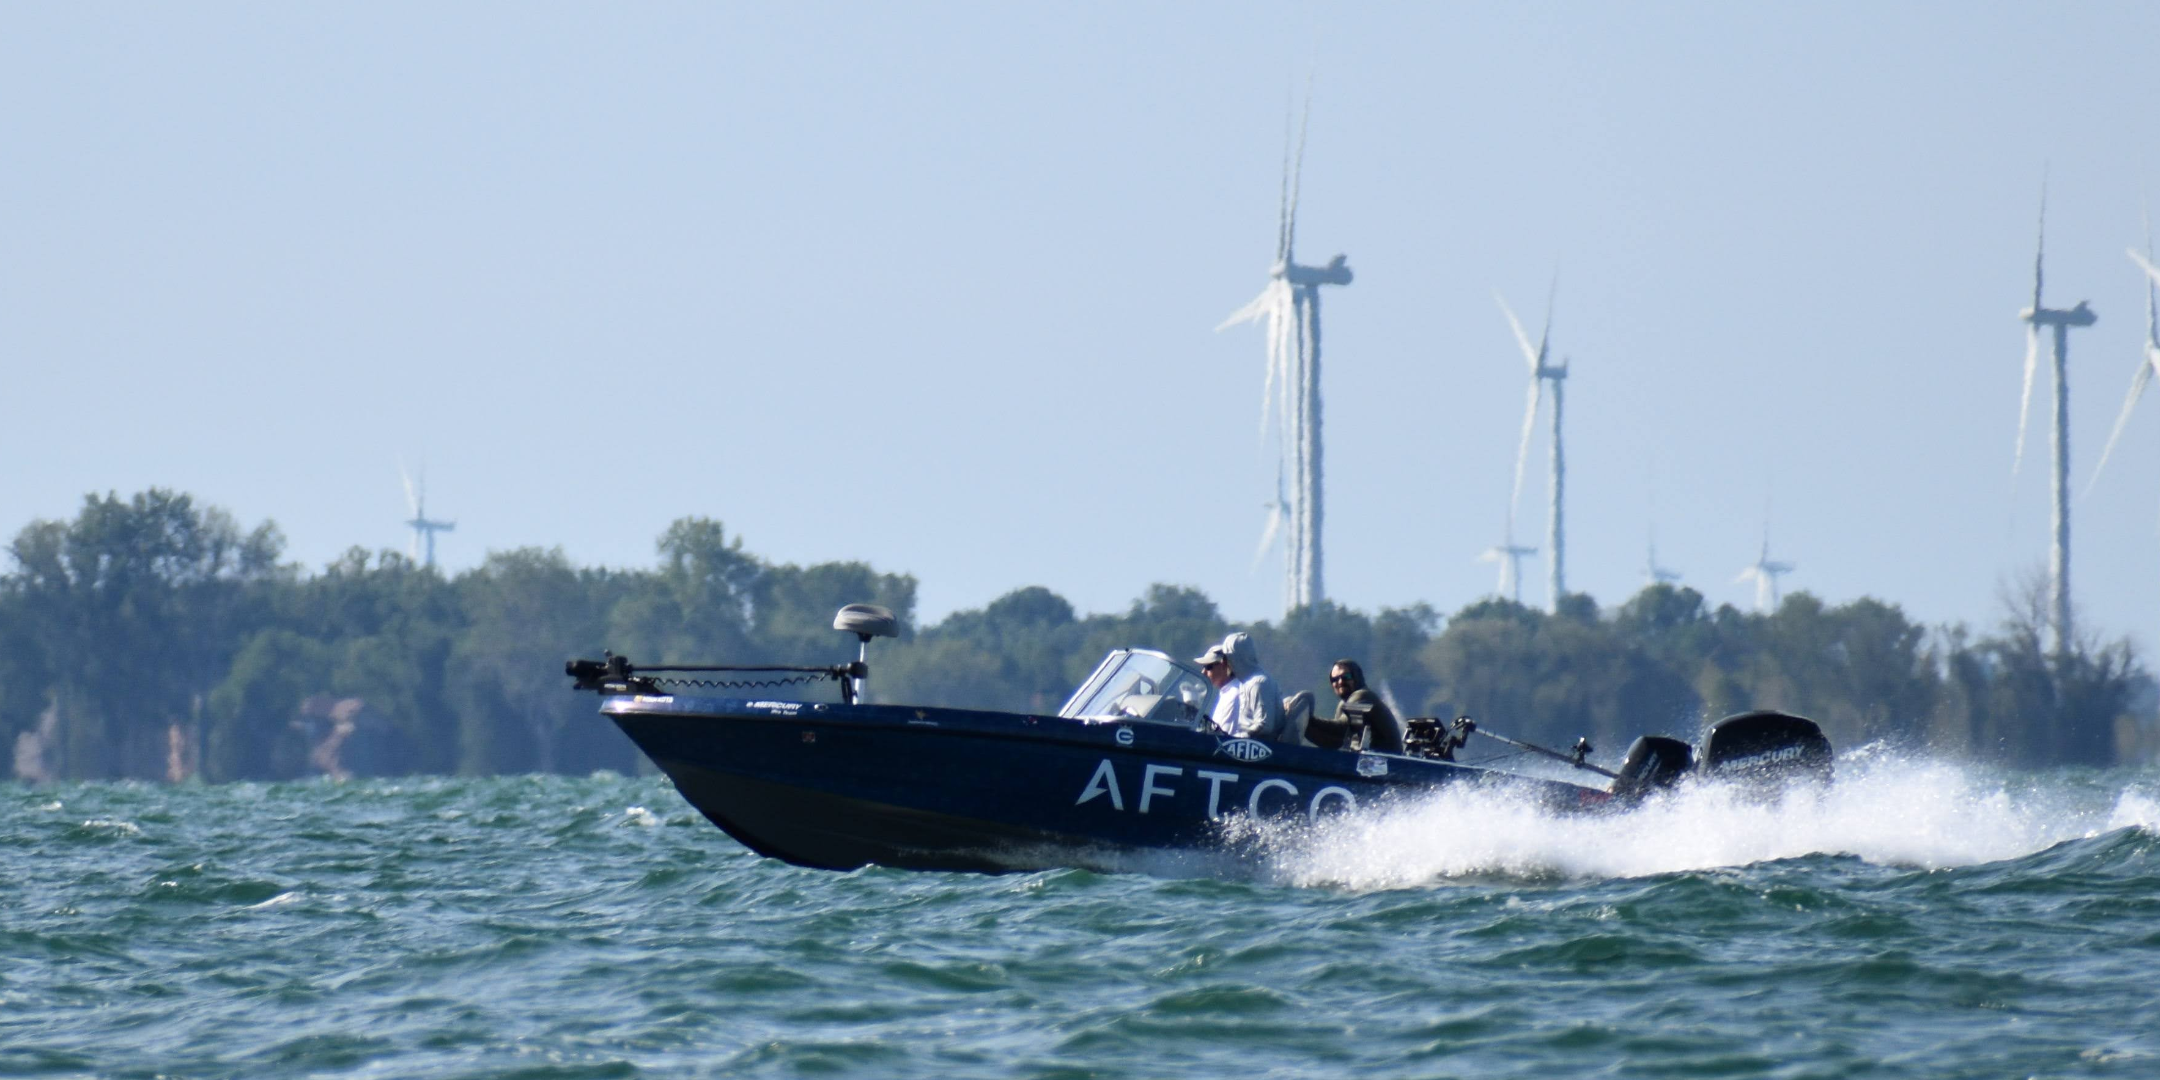 Boat on Lake Erie with wind mills in the background